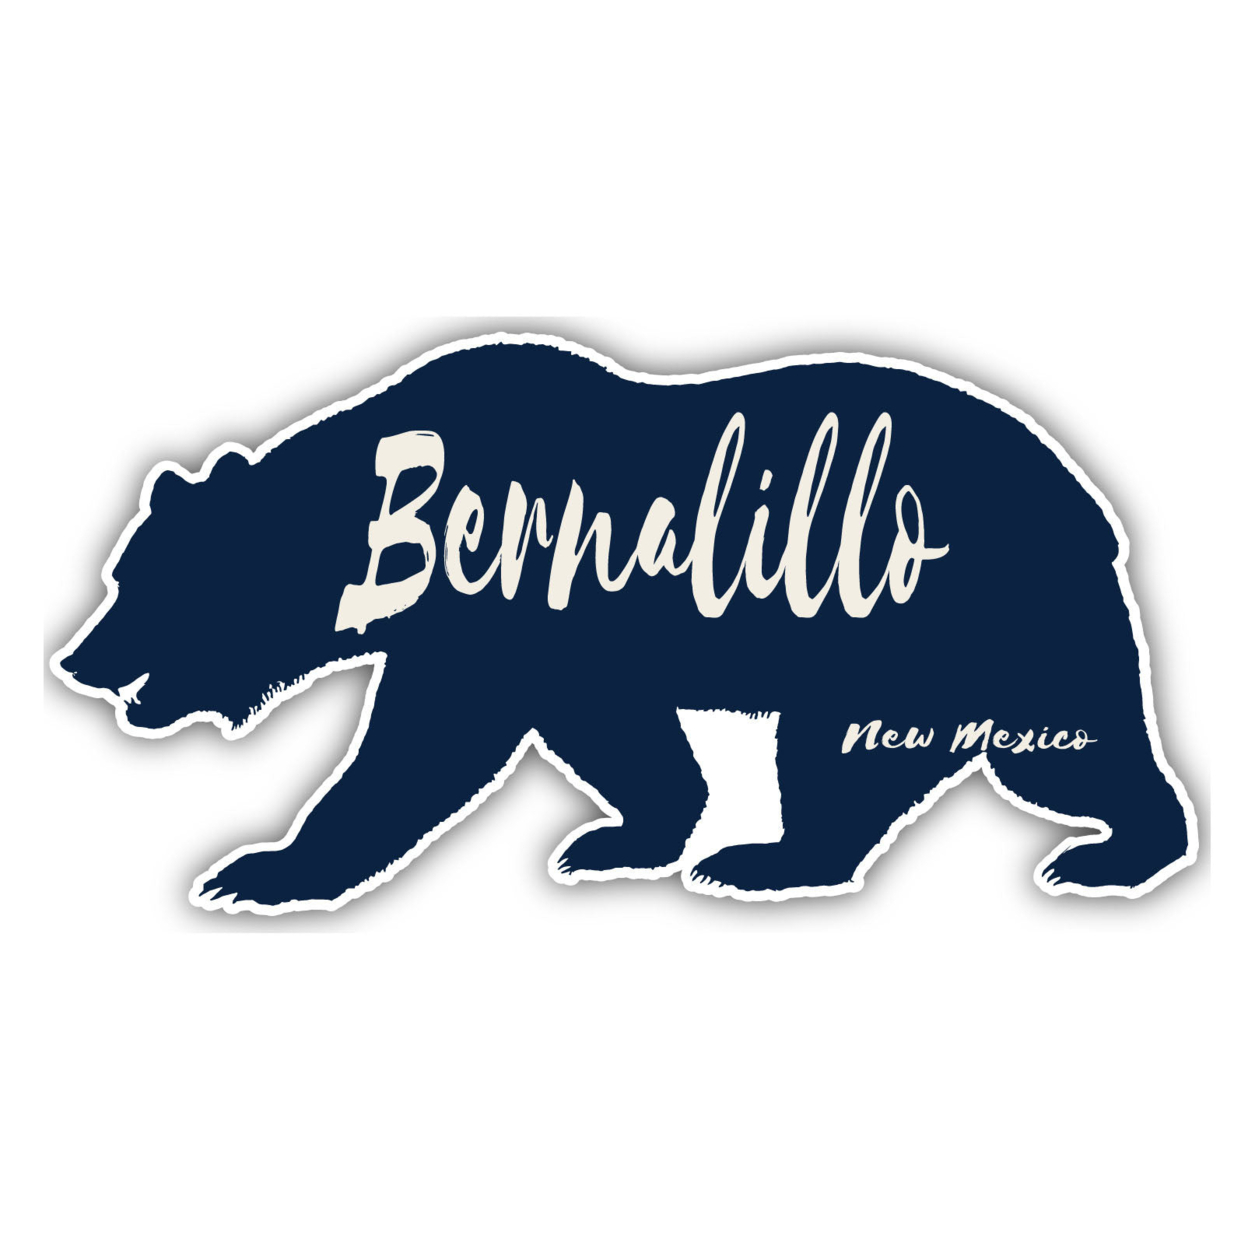 Bernalillo New Mexico Souvenir Decorative Stickers (Choose Theme And Size) - 4-Pack, 10-Inch, Bear